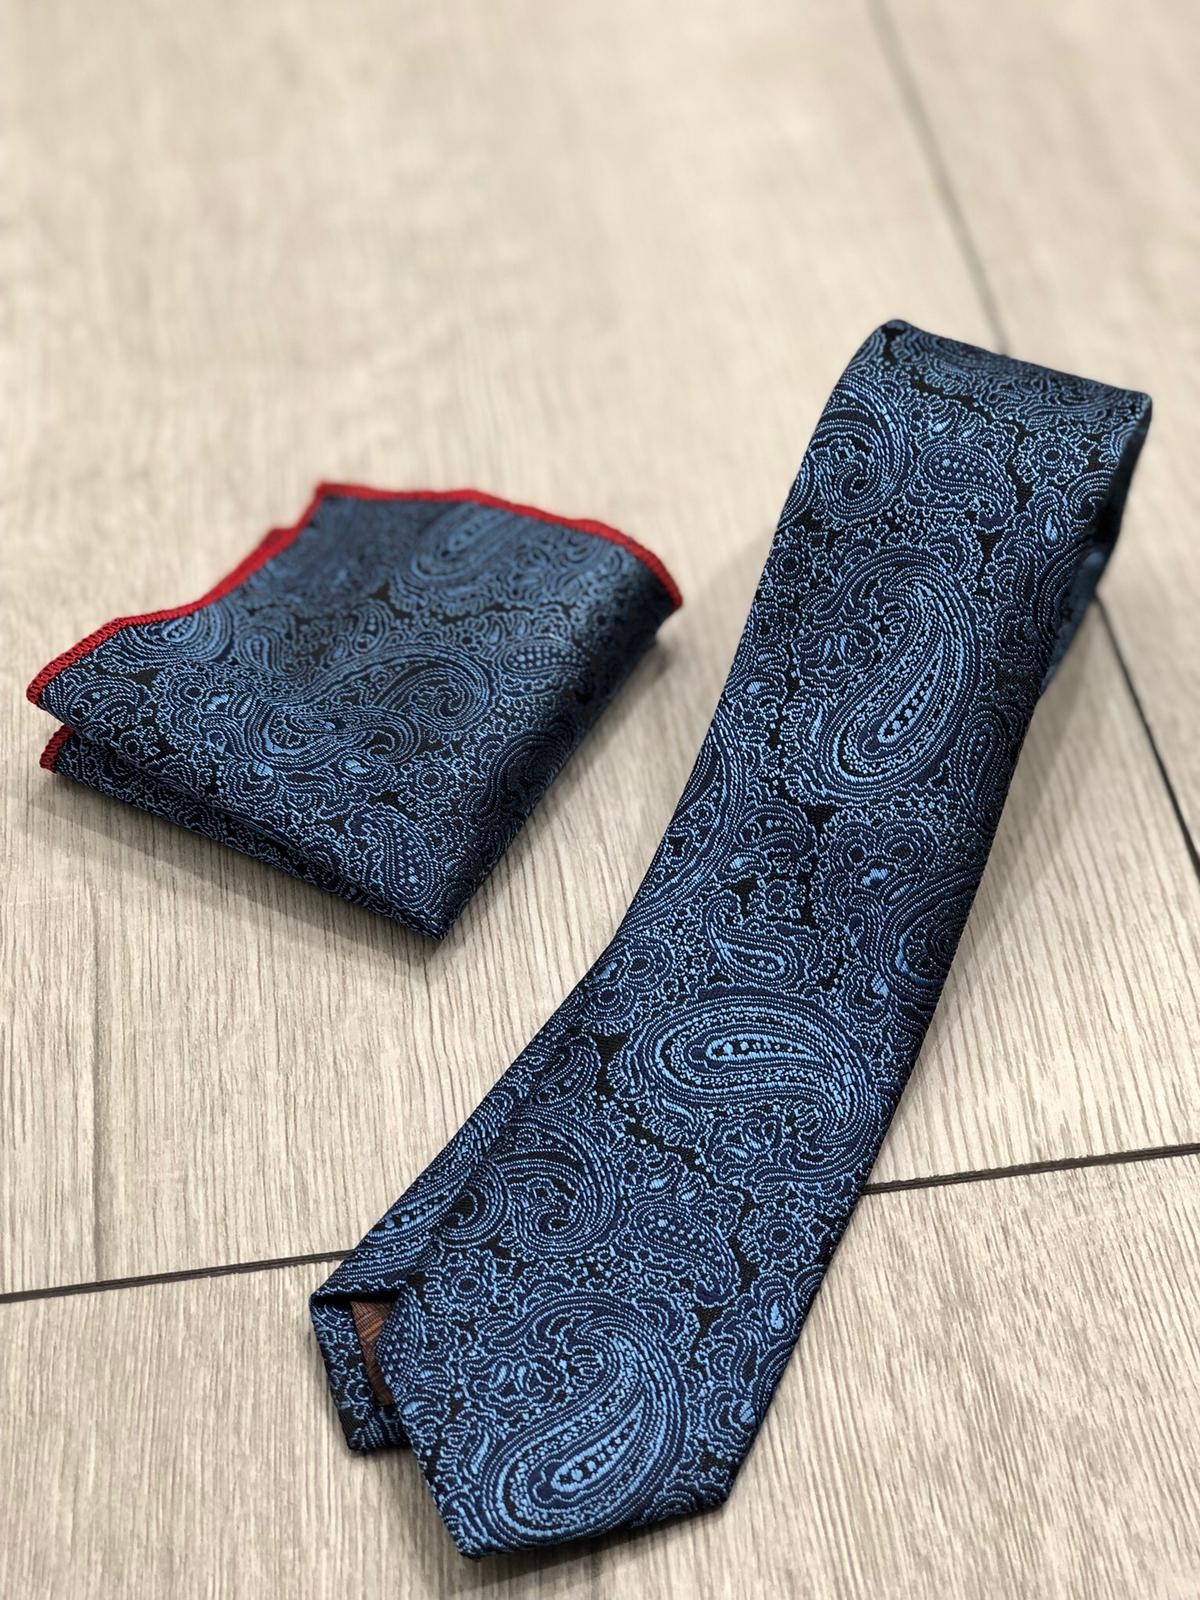 Buy Black Floral Tie by Gentwith.com with Free Shipping